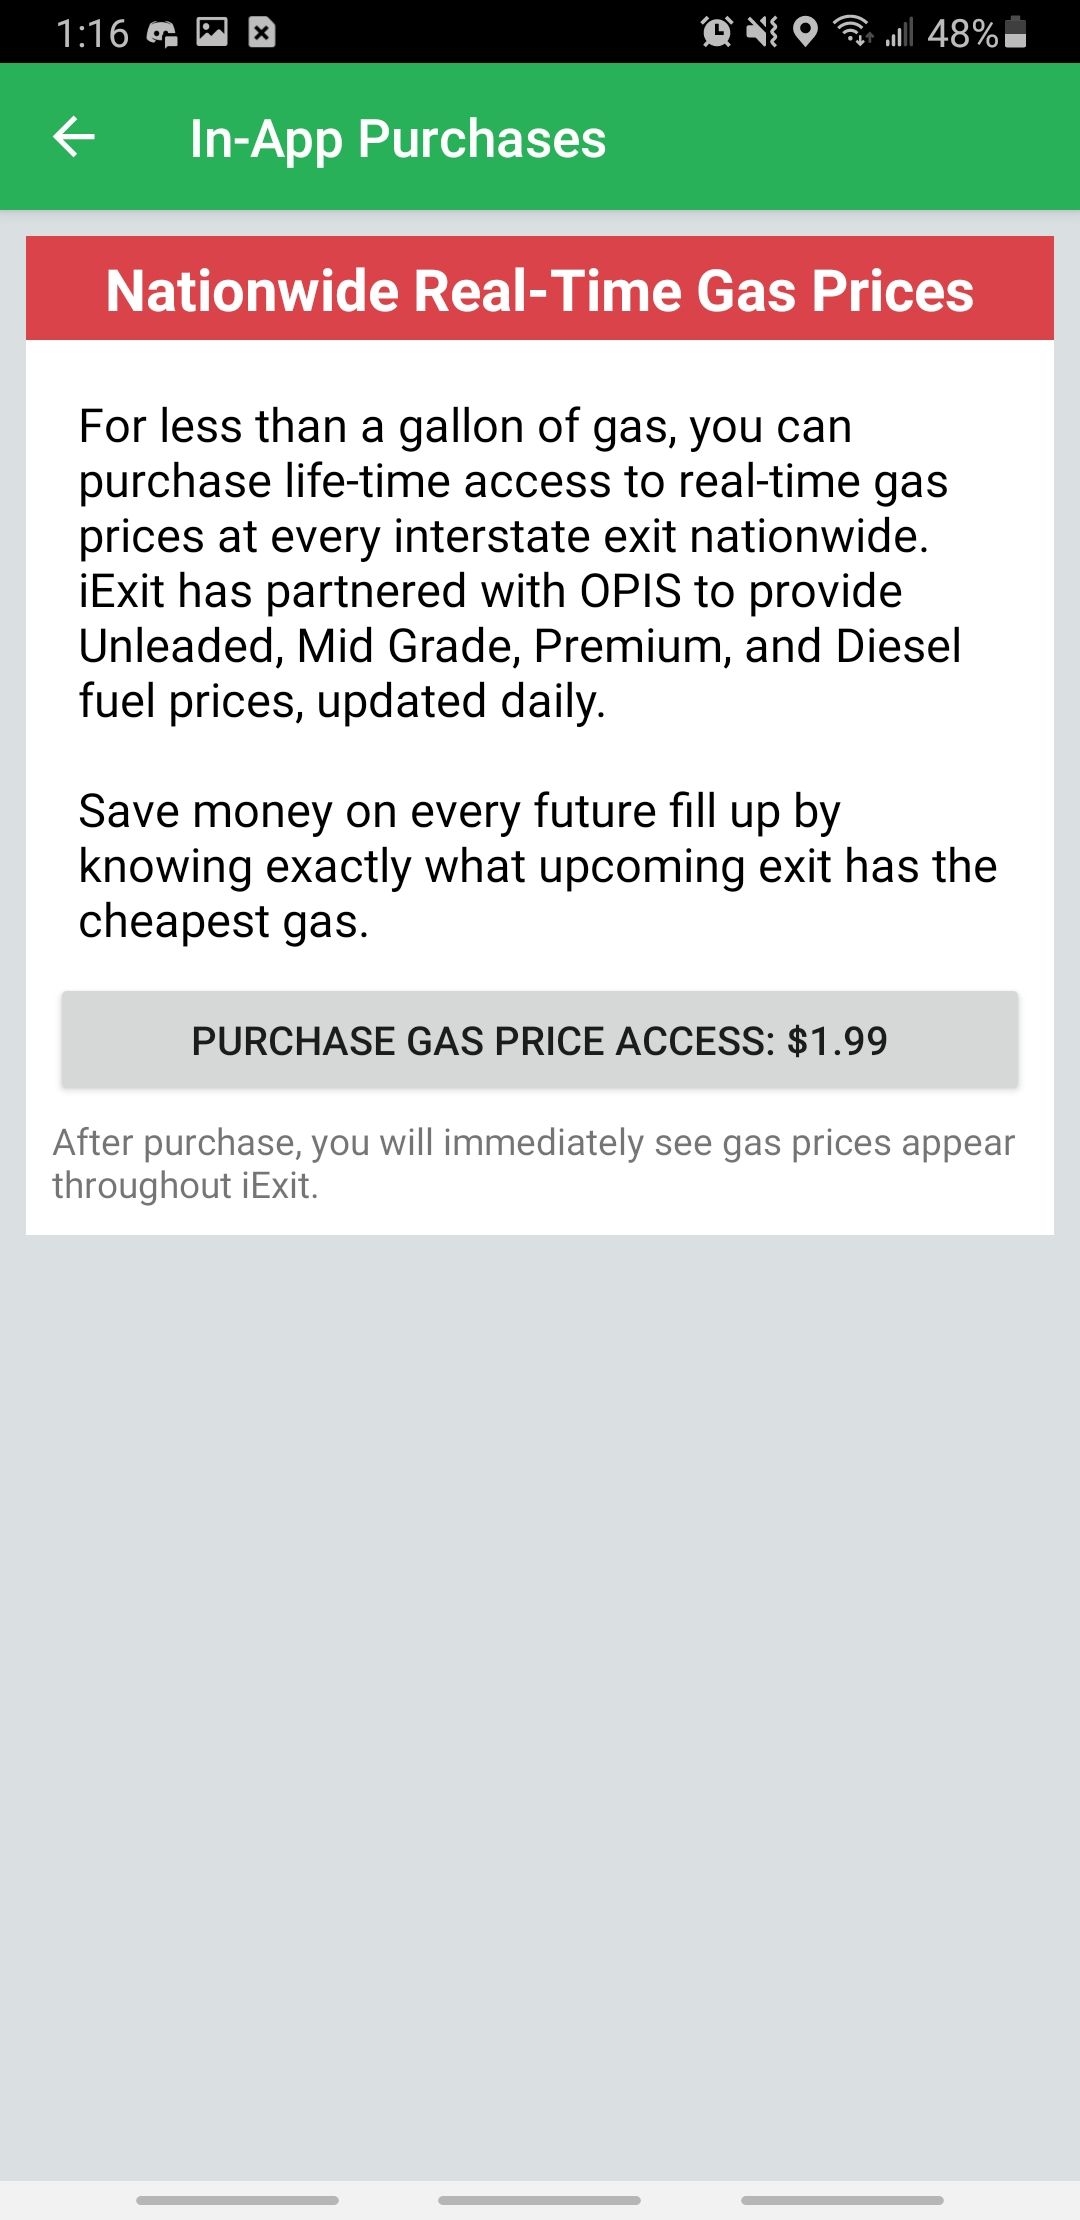 iexit purchase gas price access page